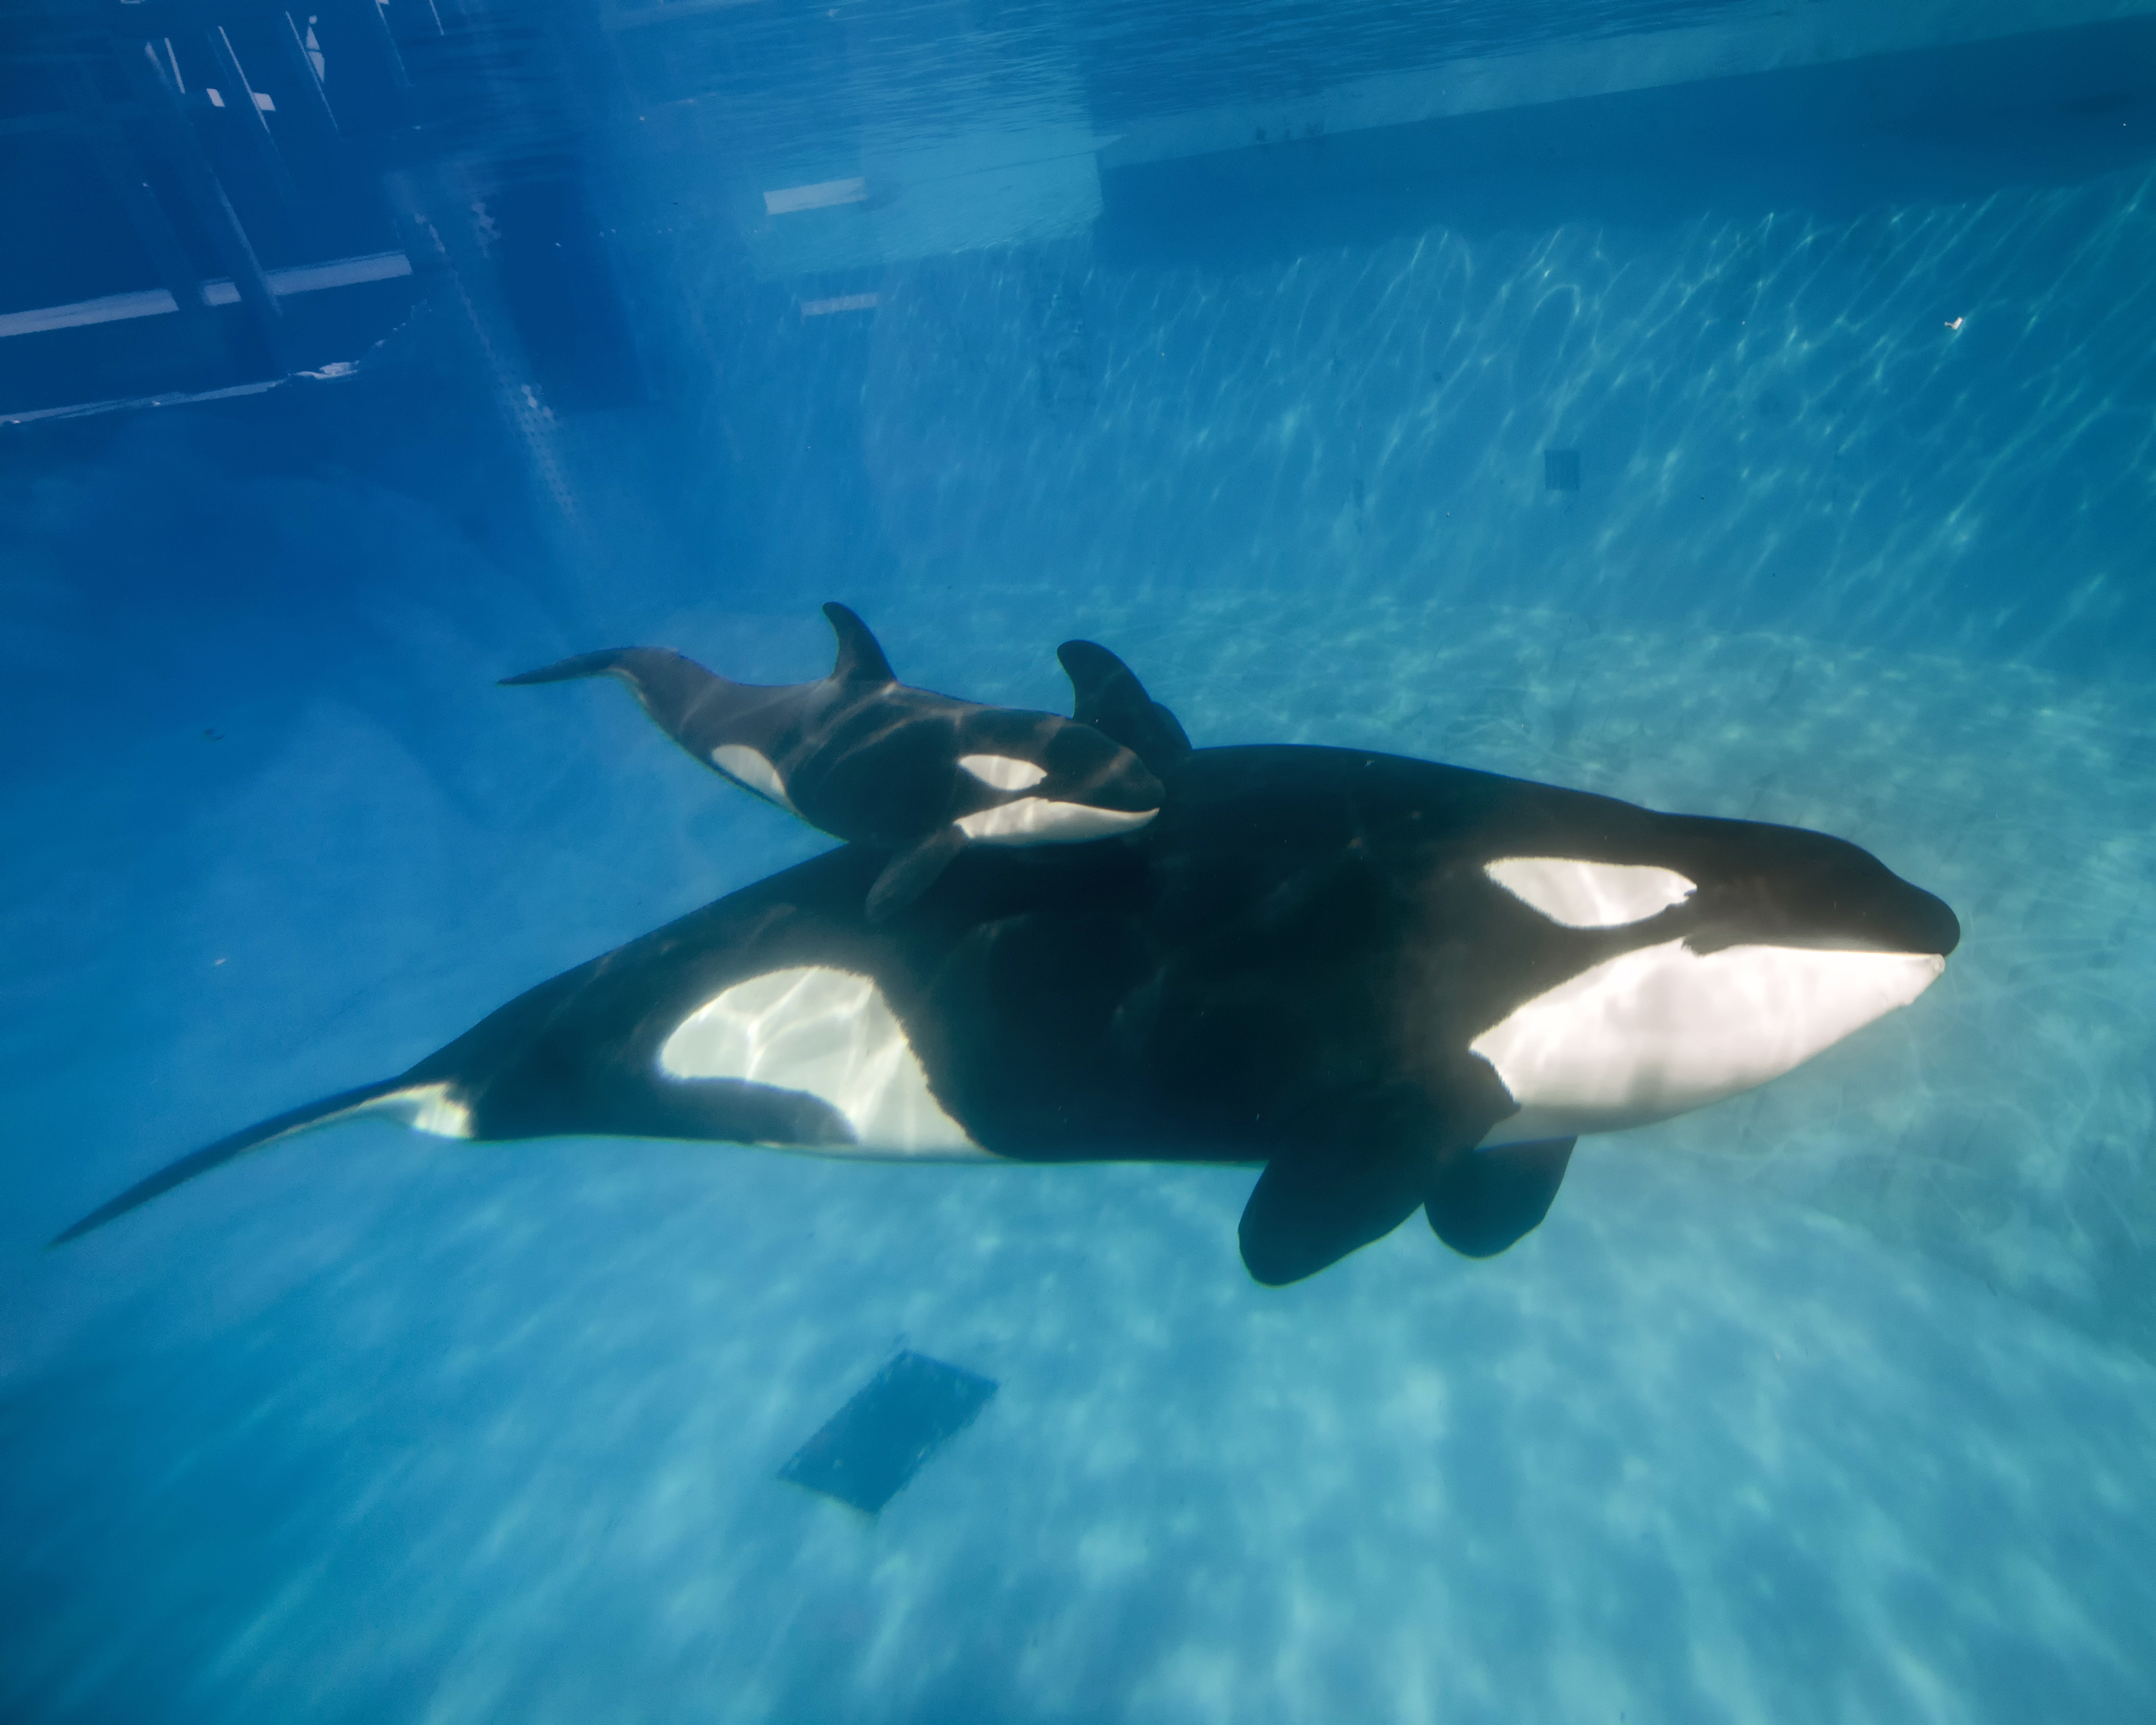 In this handout photo provided by SeaWorld San Diego, mom and baby killer whale swim together at SeaWorld San Diego's Shamu Stadium December 4, 2014 in San Diego, California. (Mike Aguilera&mdash;SeaWorld San Diego/Getty Images)